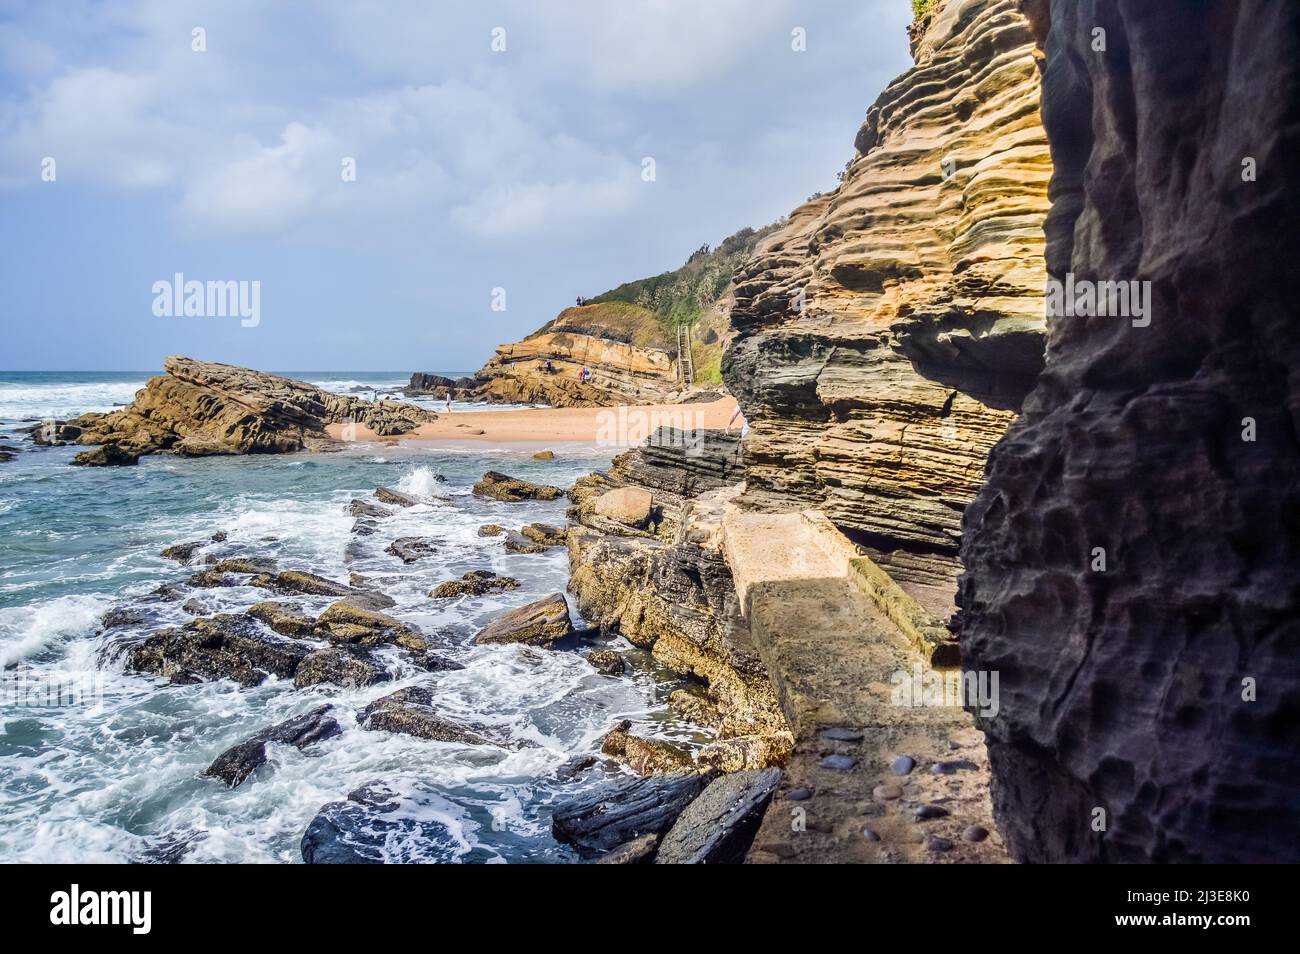 Hole in the wall natural rock formation at Thompsons bay beach ballito South Africa Stock Photo